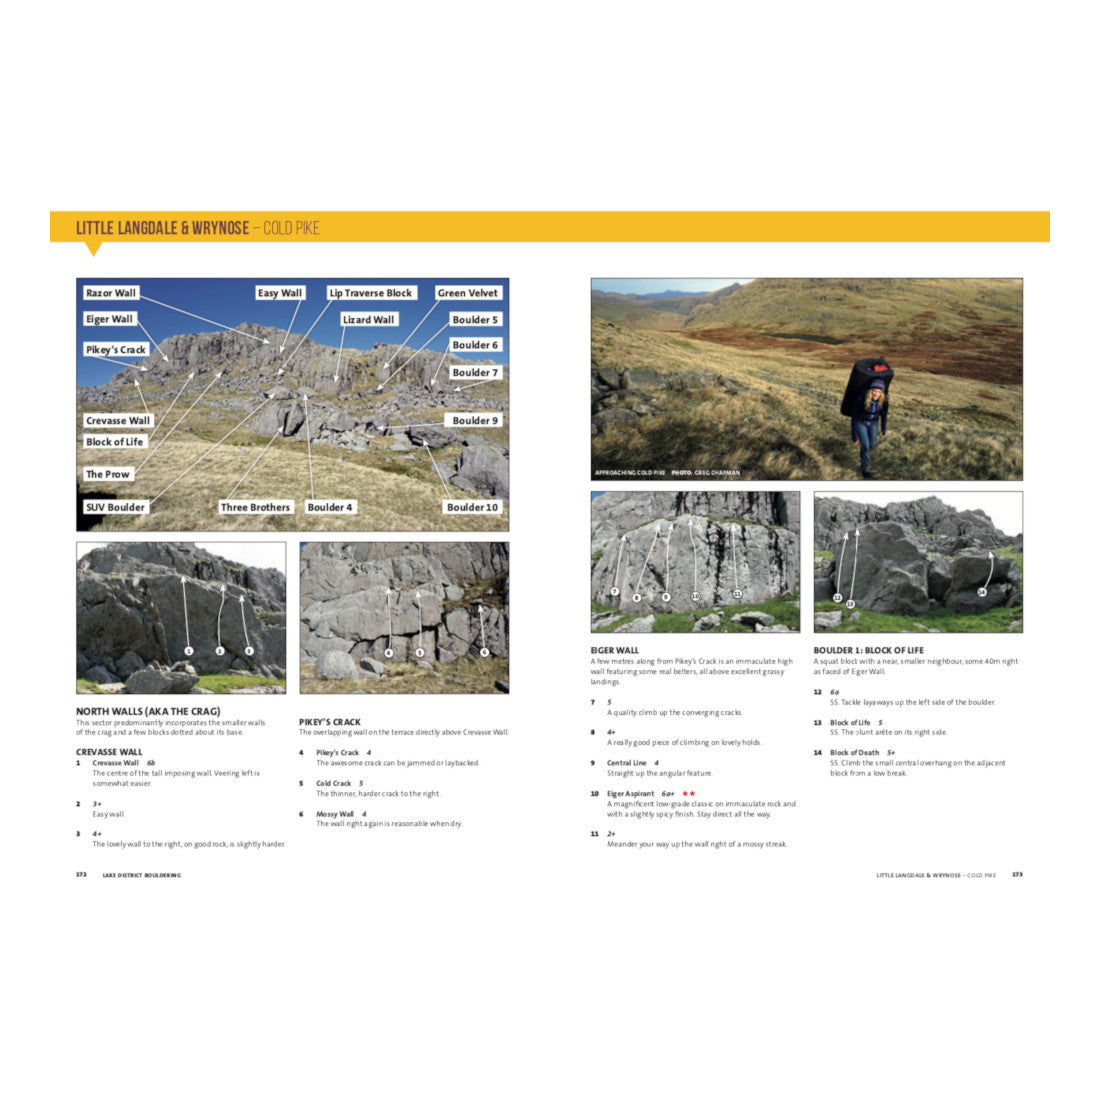 Lake District Bouldering guide, inside page examples showing topos and maps